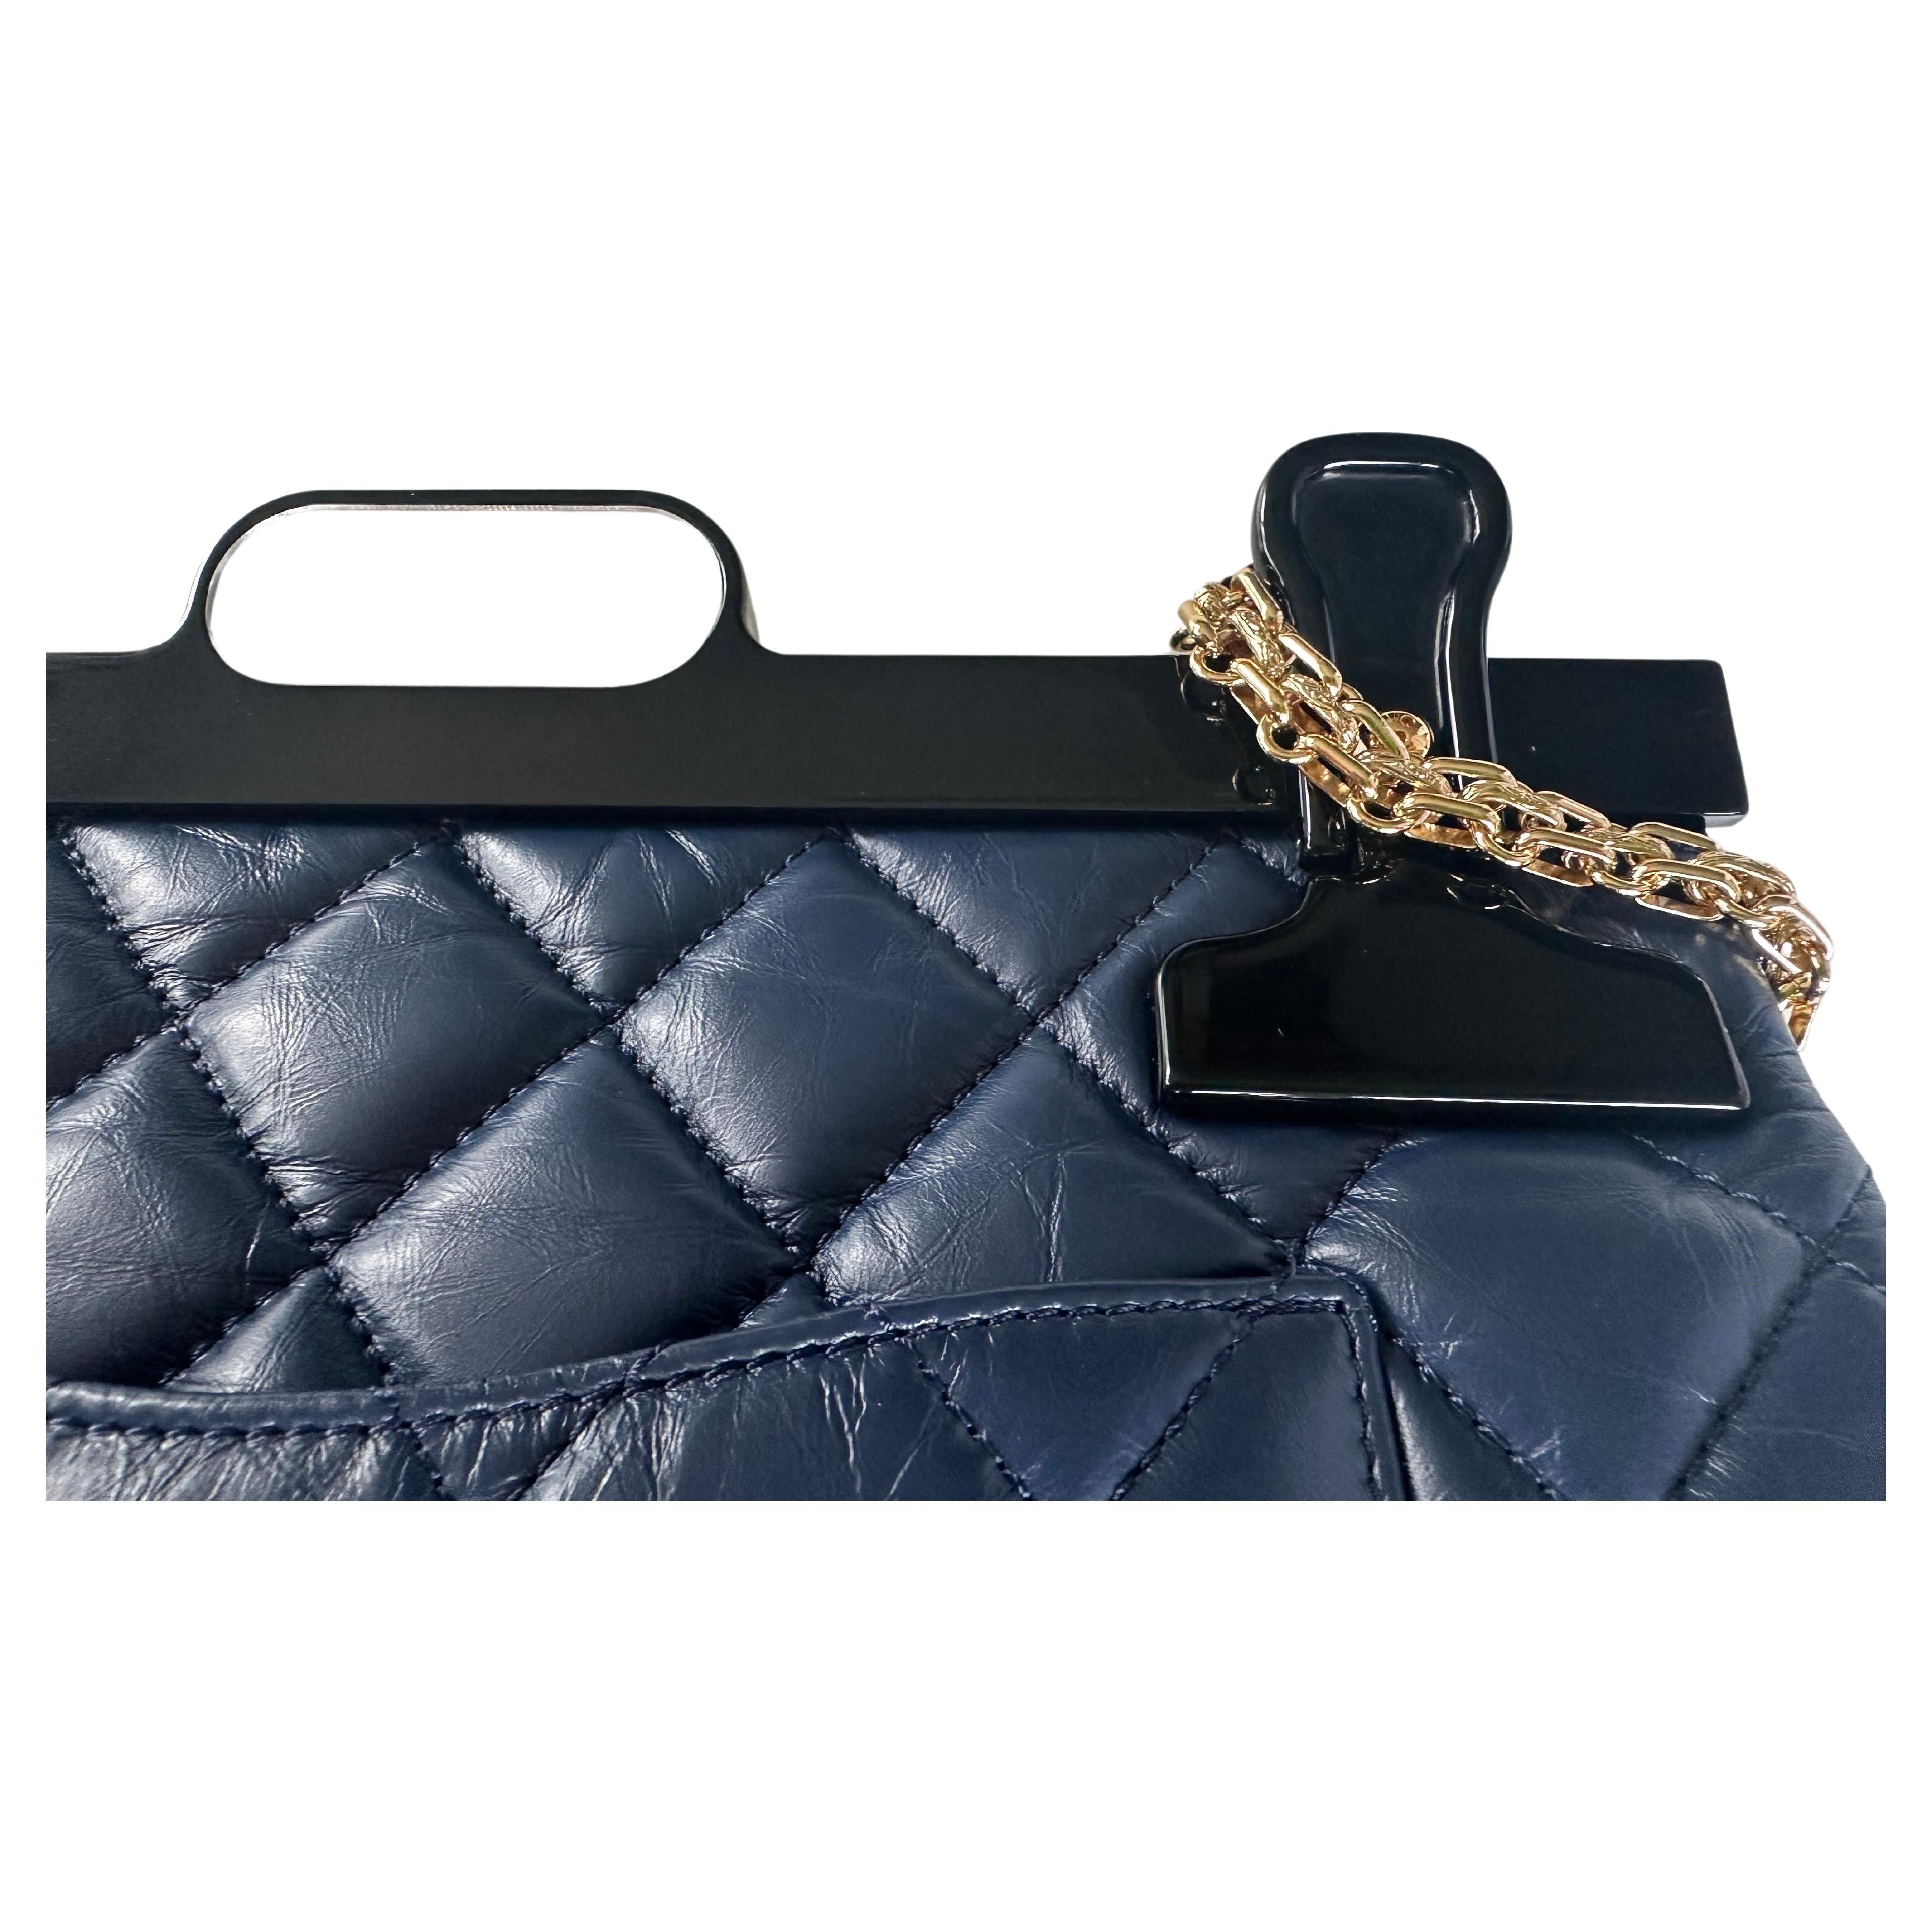 Chanel 2016 Limited Editiion 2.55 Reissue Rare Hanger Navy Blue Classic Flap Bag 1